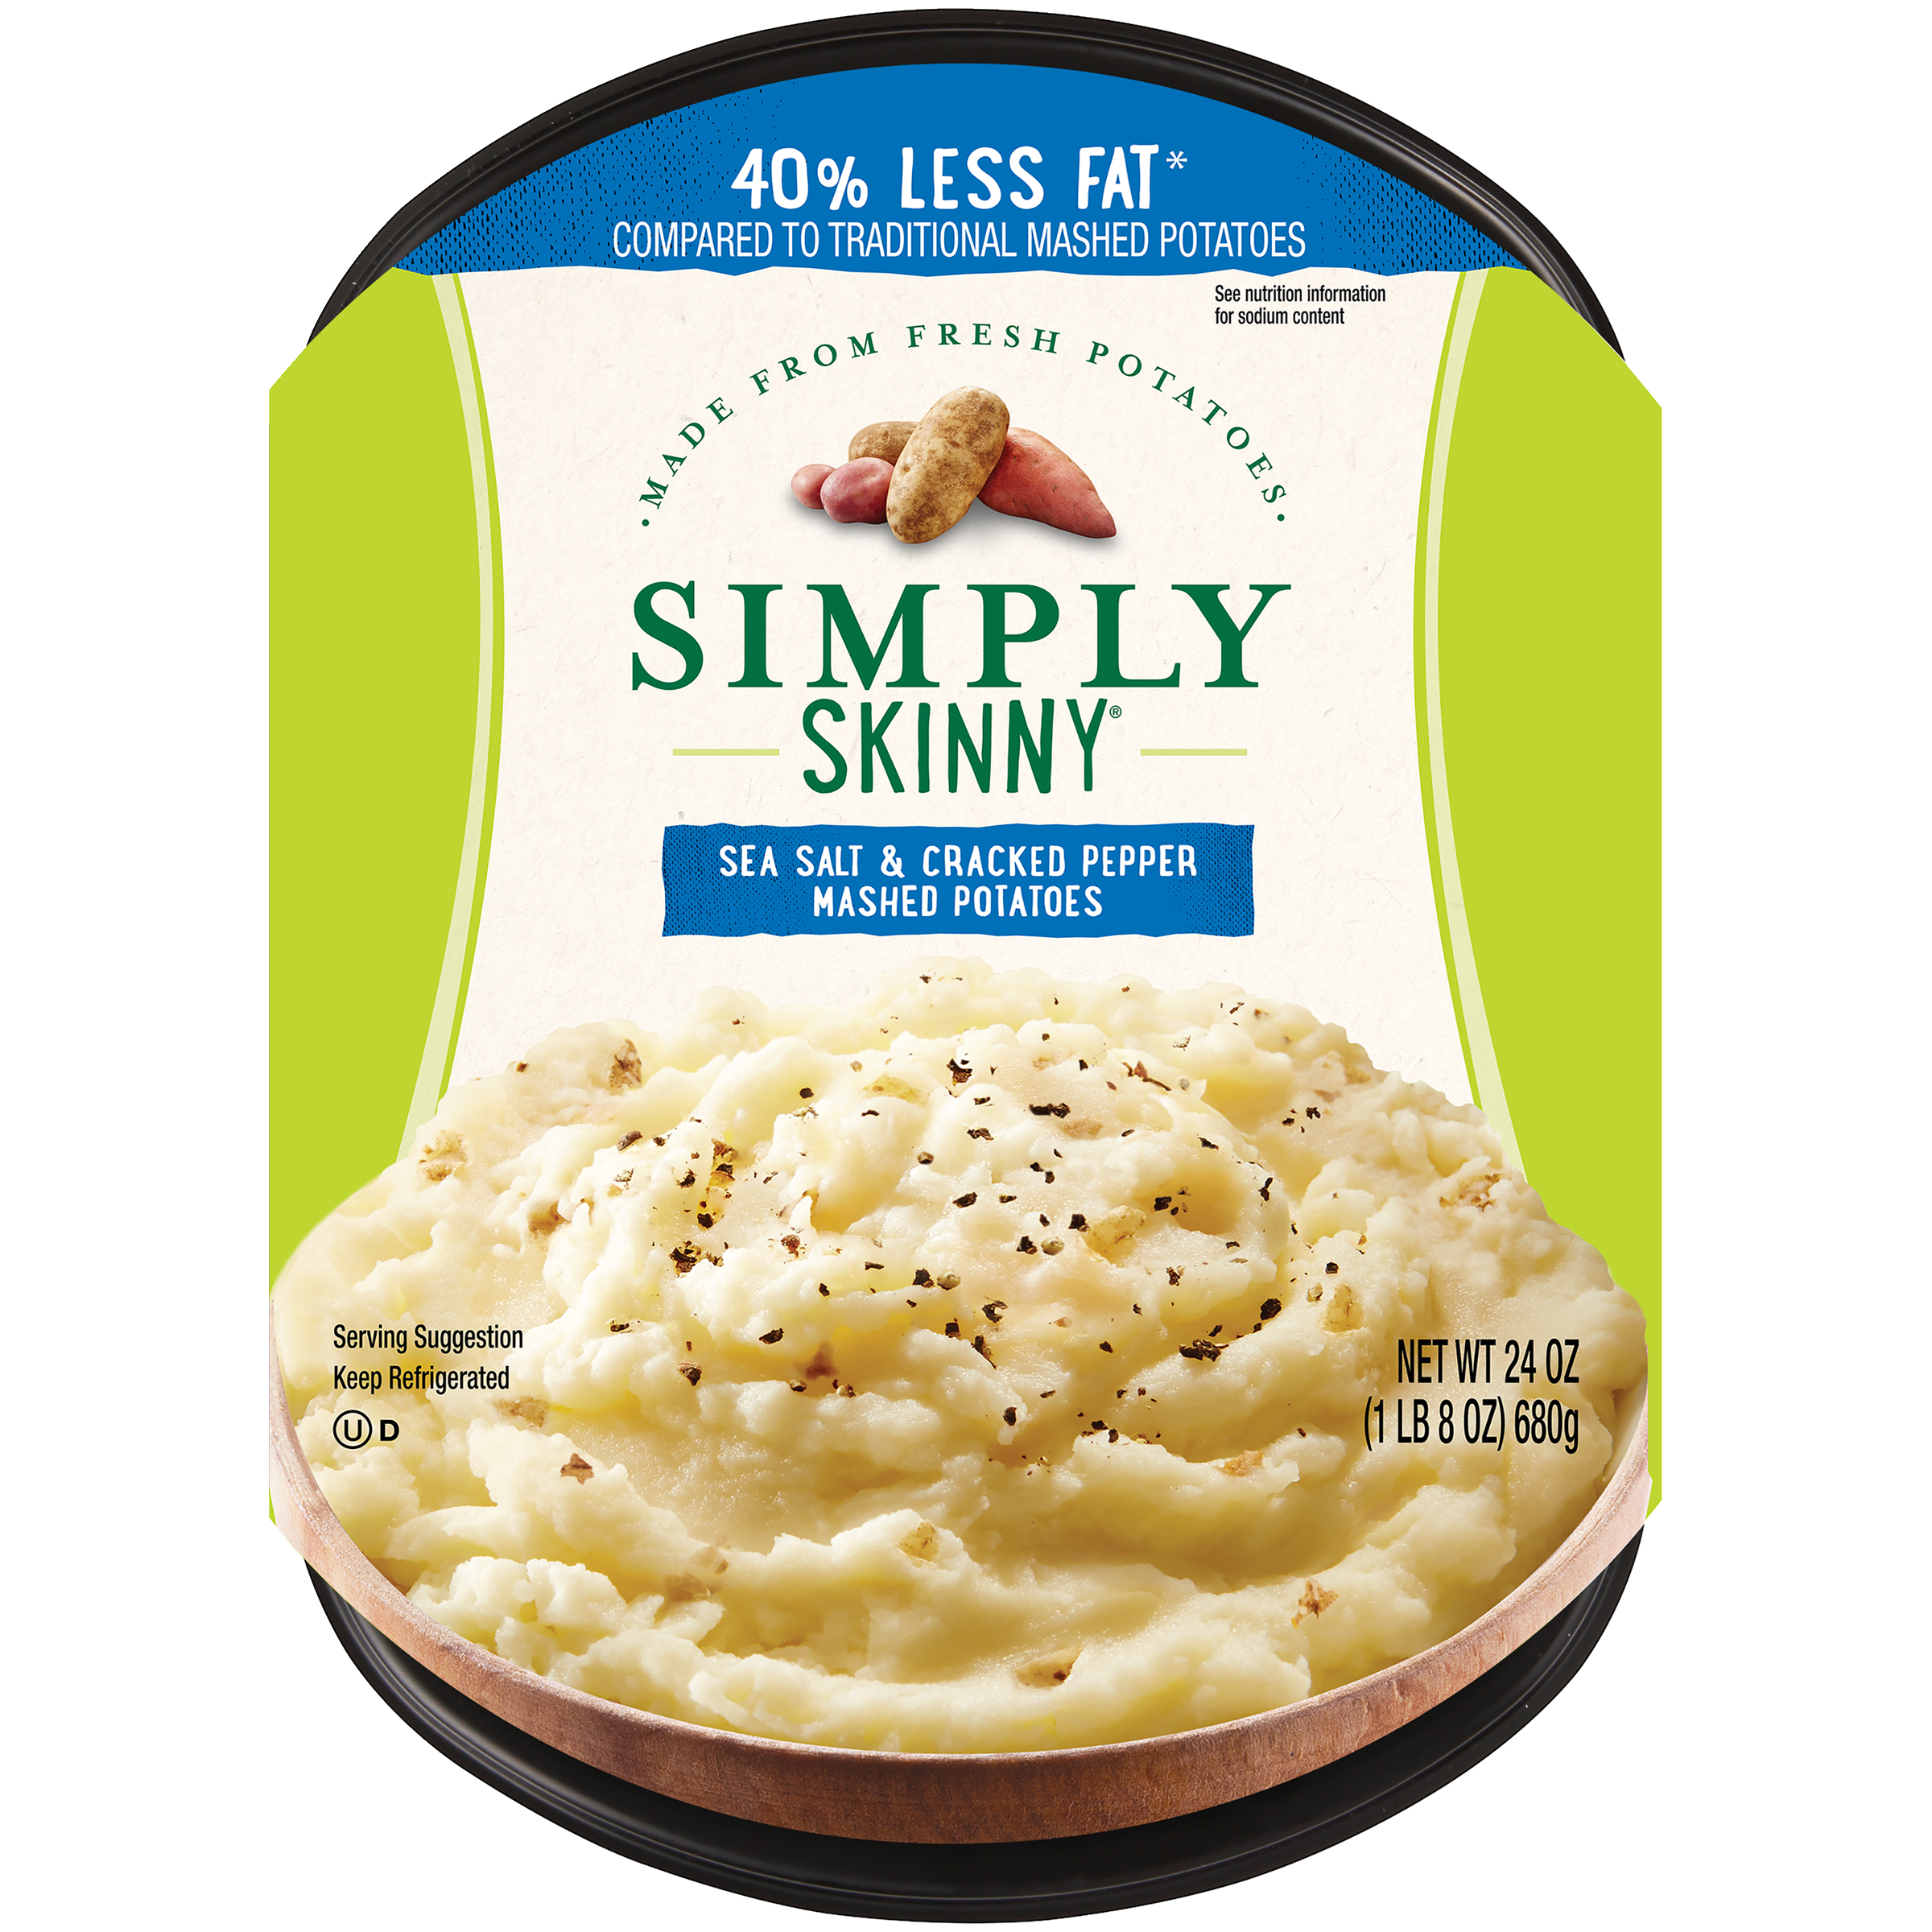 photo of Simply Skinny Sea Salt & Cracked Pepper Mashed Potatoes product